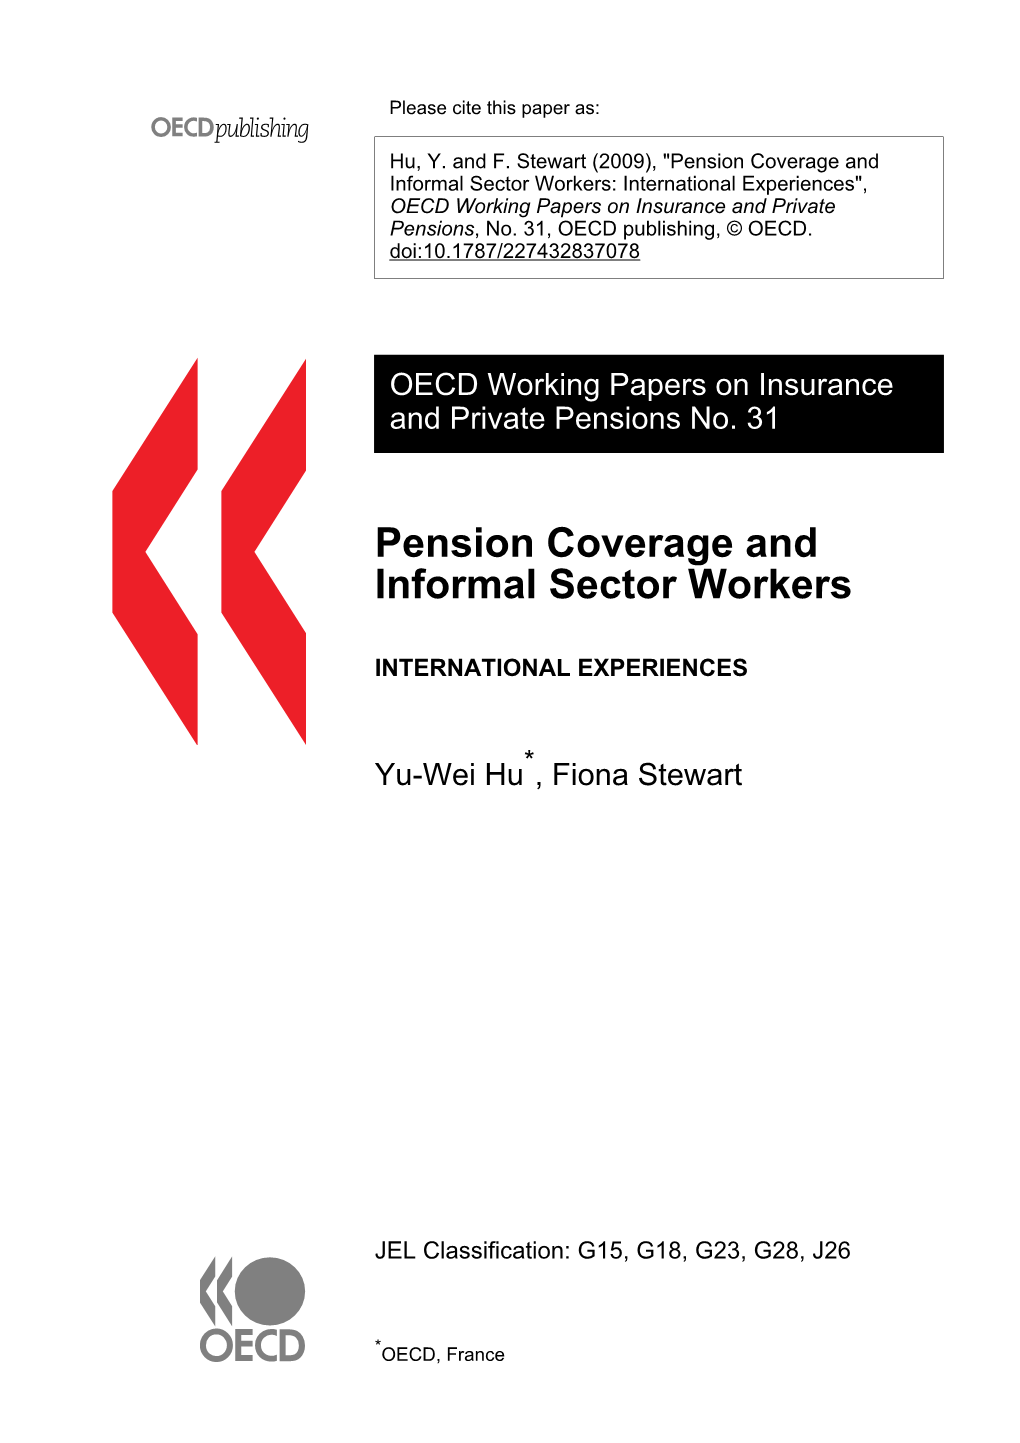 Pension Coverage and Informal Sector Workers: International Experiences", OECD Working Papers on Insurance and Private Pensions, No